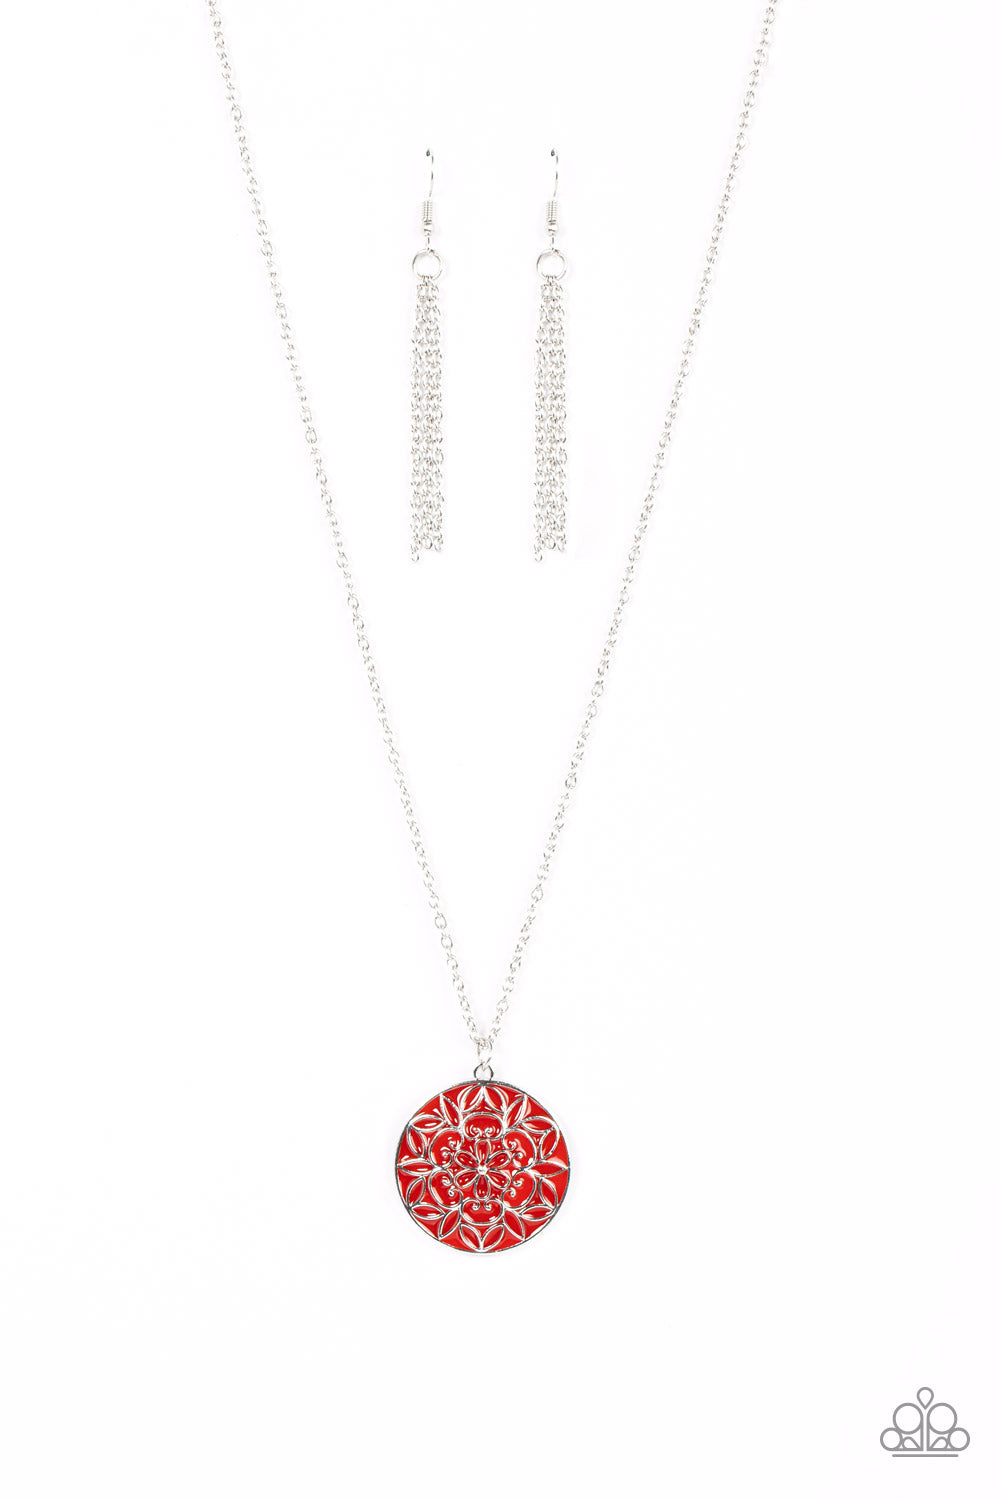 Colorfully Cottagecore - Red and Silver Necklace - Paparazzi Accessories - A mandala-like floral motif is embossed across the front of a shiny red frame, resulting in a whimsical pendant at the bottom of a dainty silver chain.